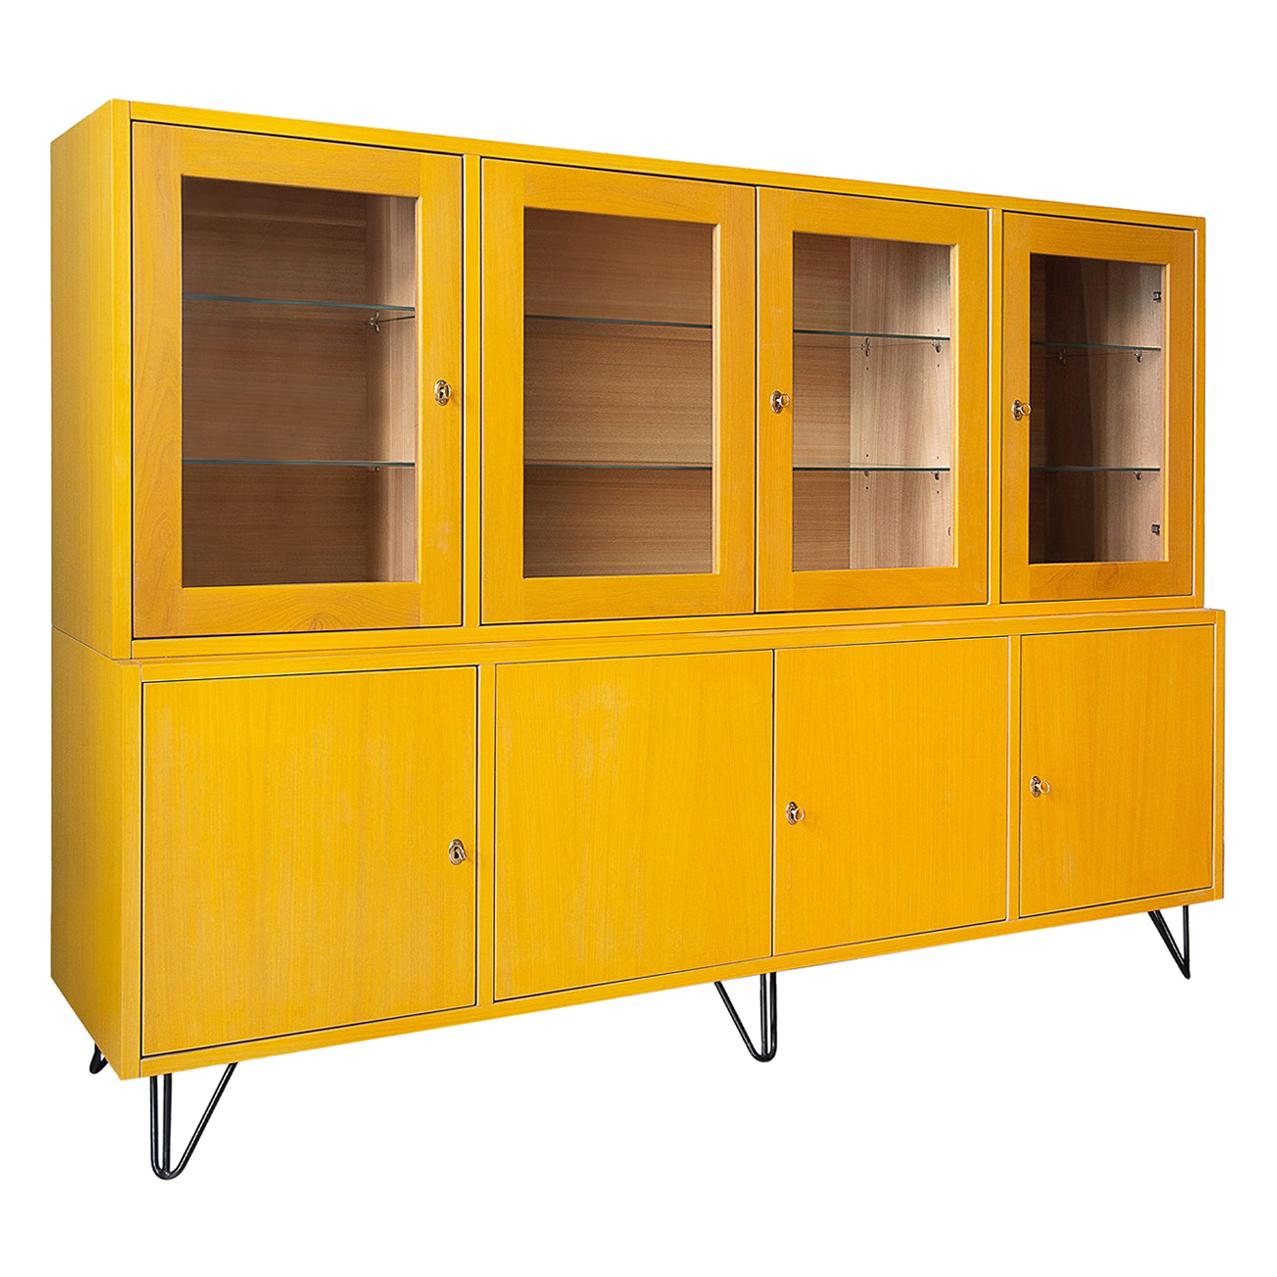 50s-style Yellow Cabinet For Sale